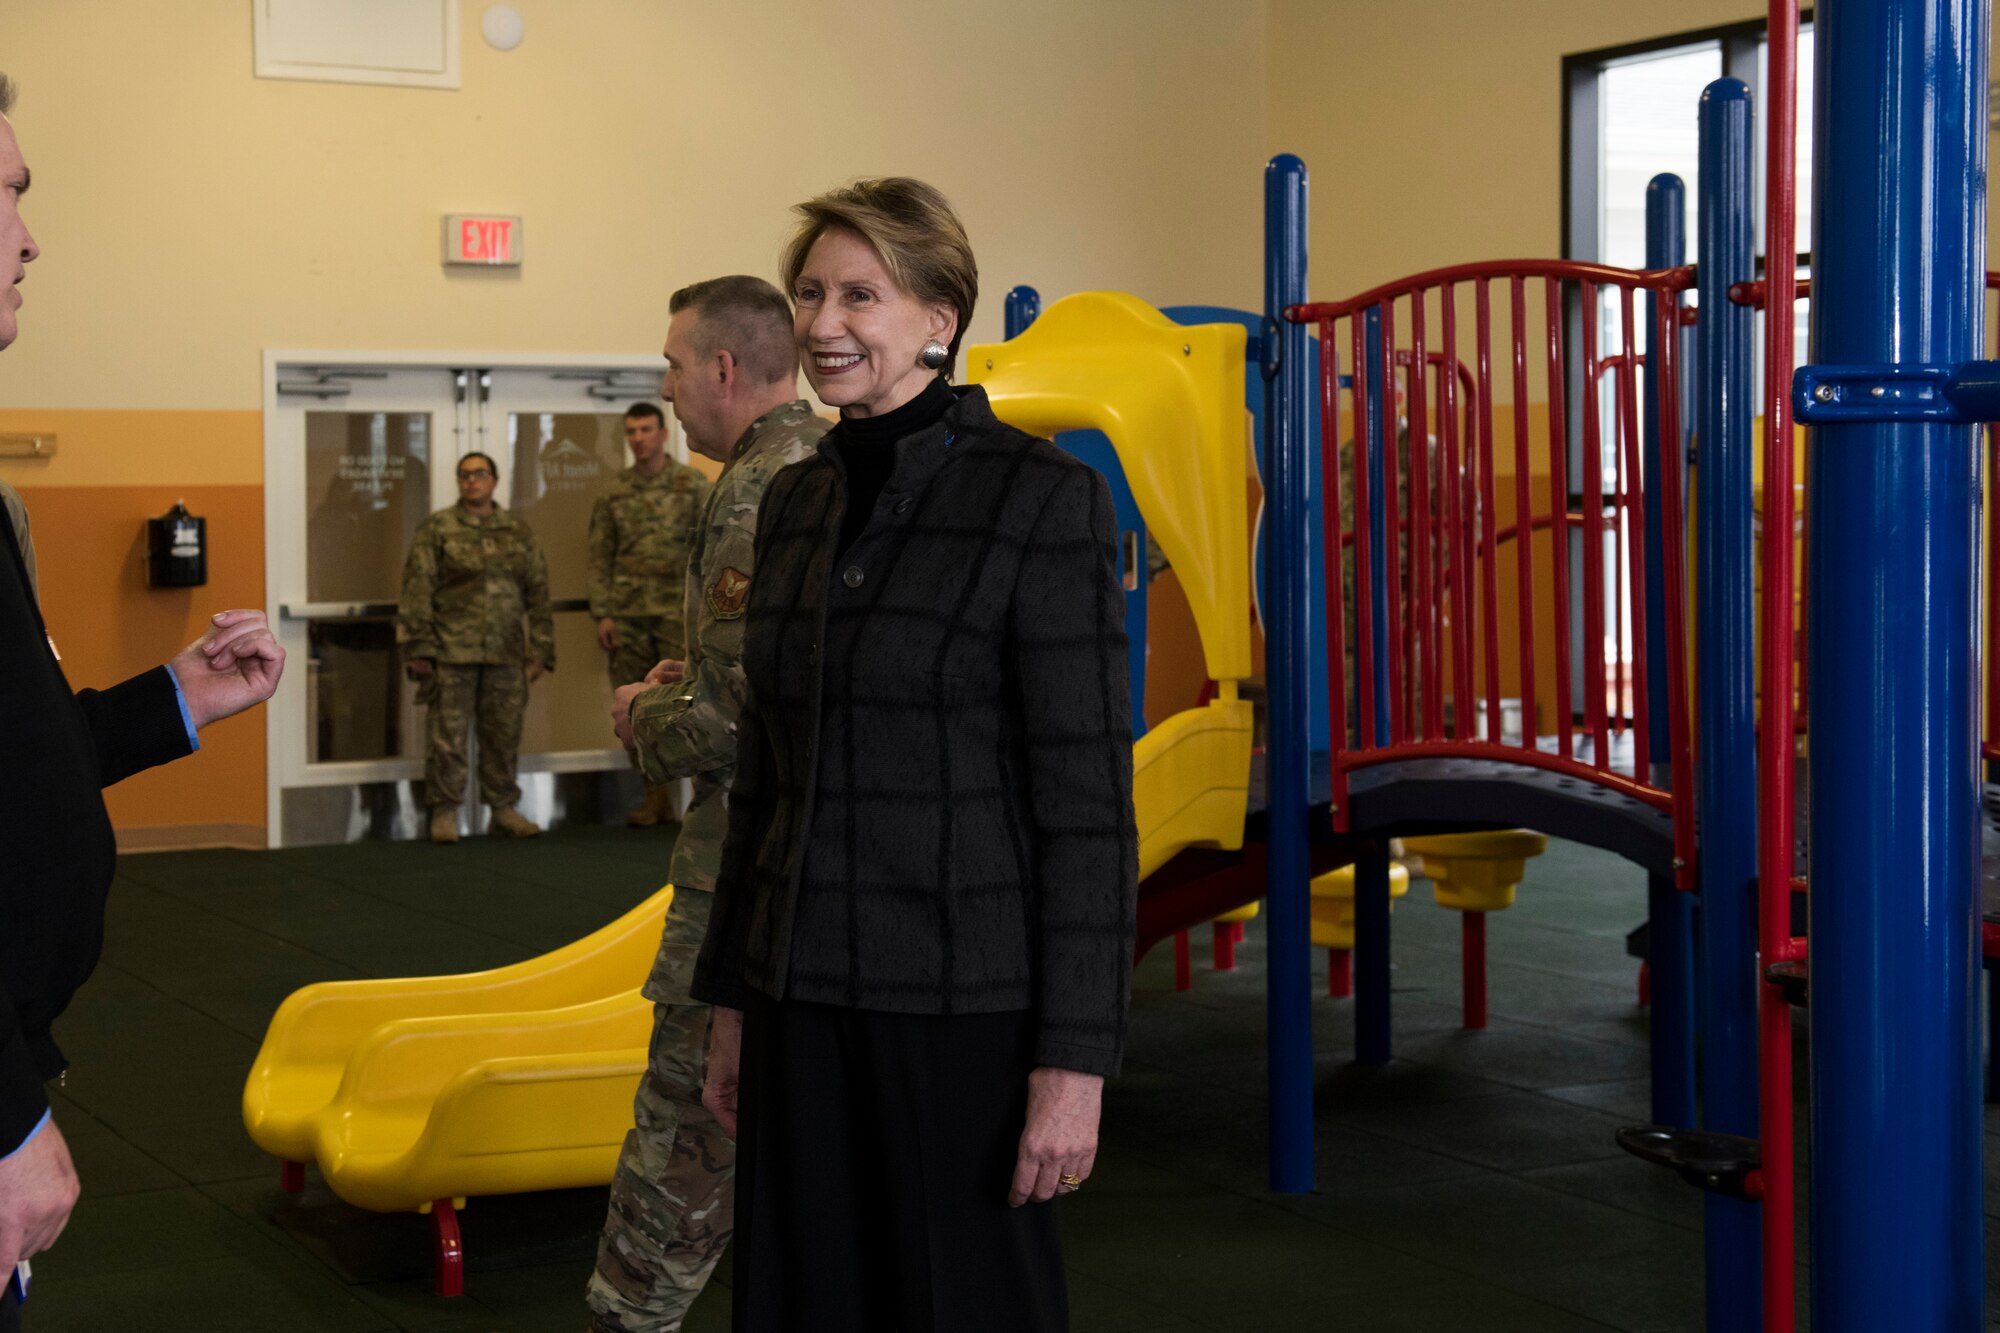 SecAF visits an indoor playground